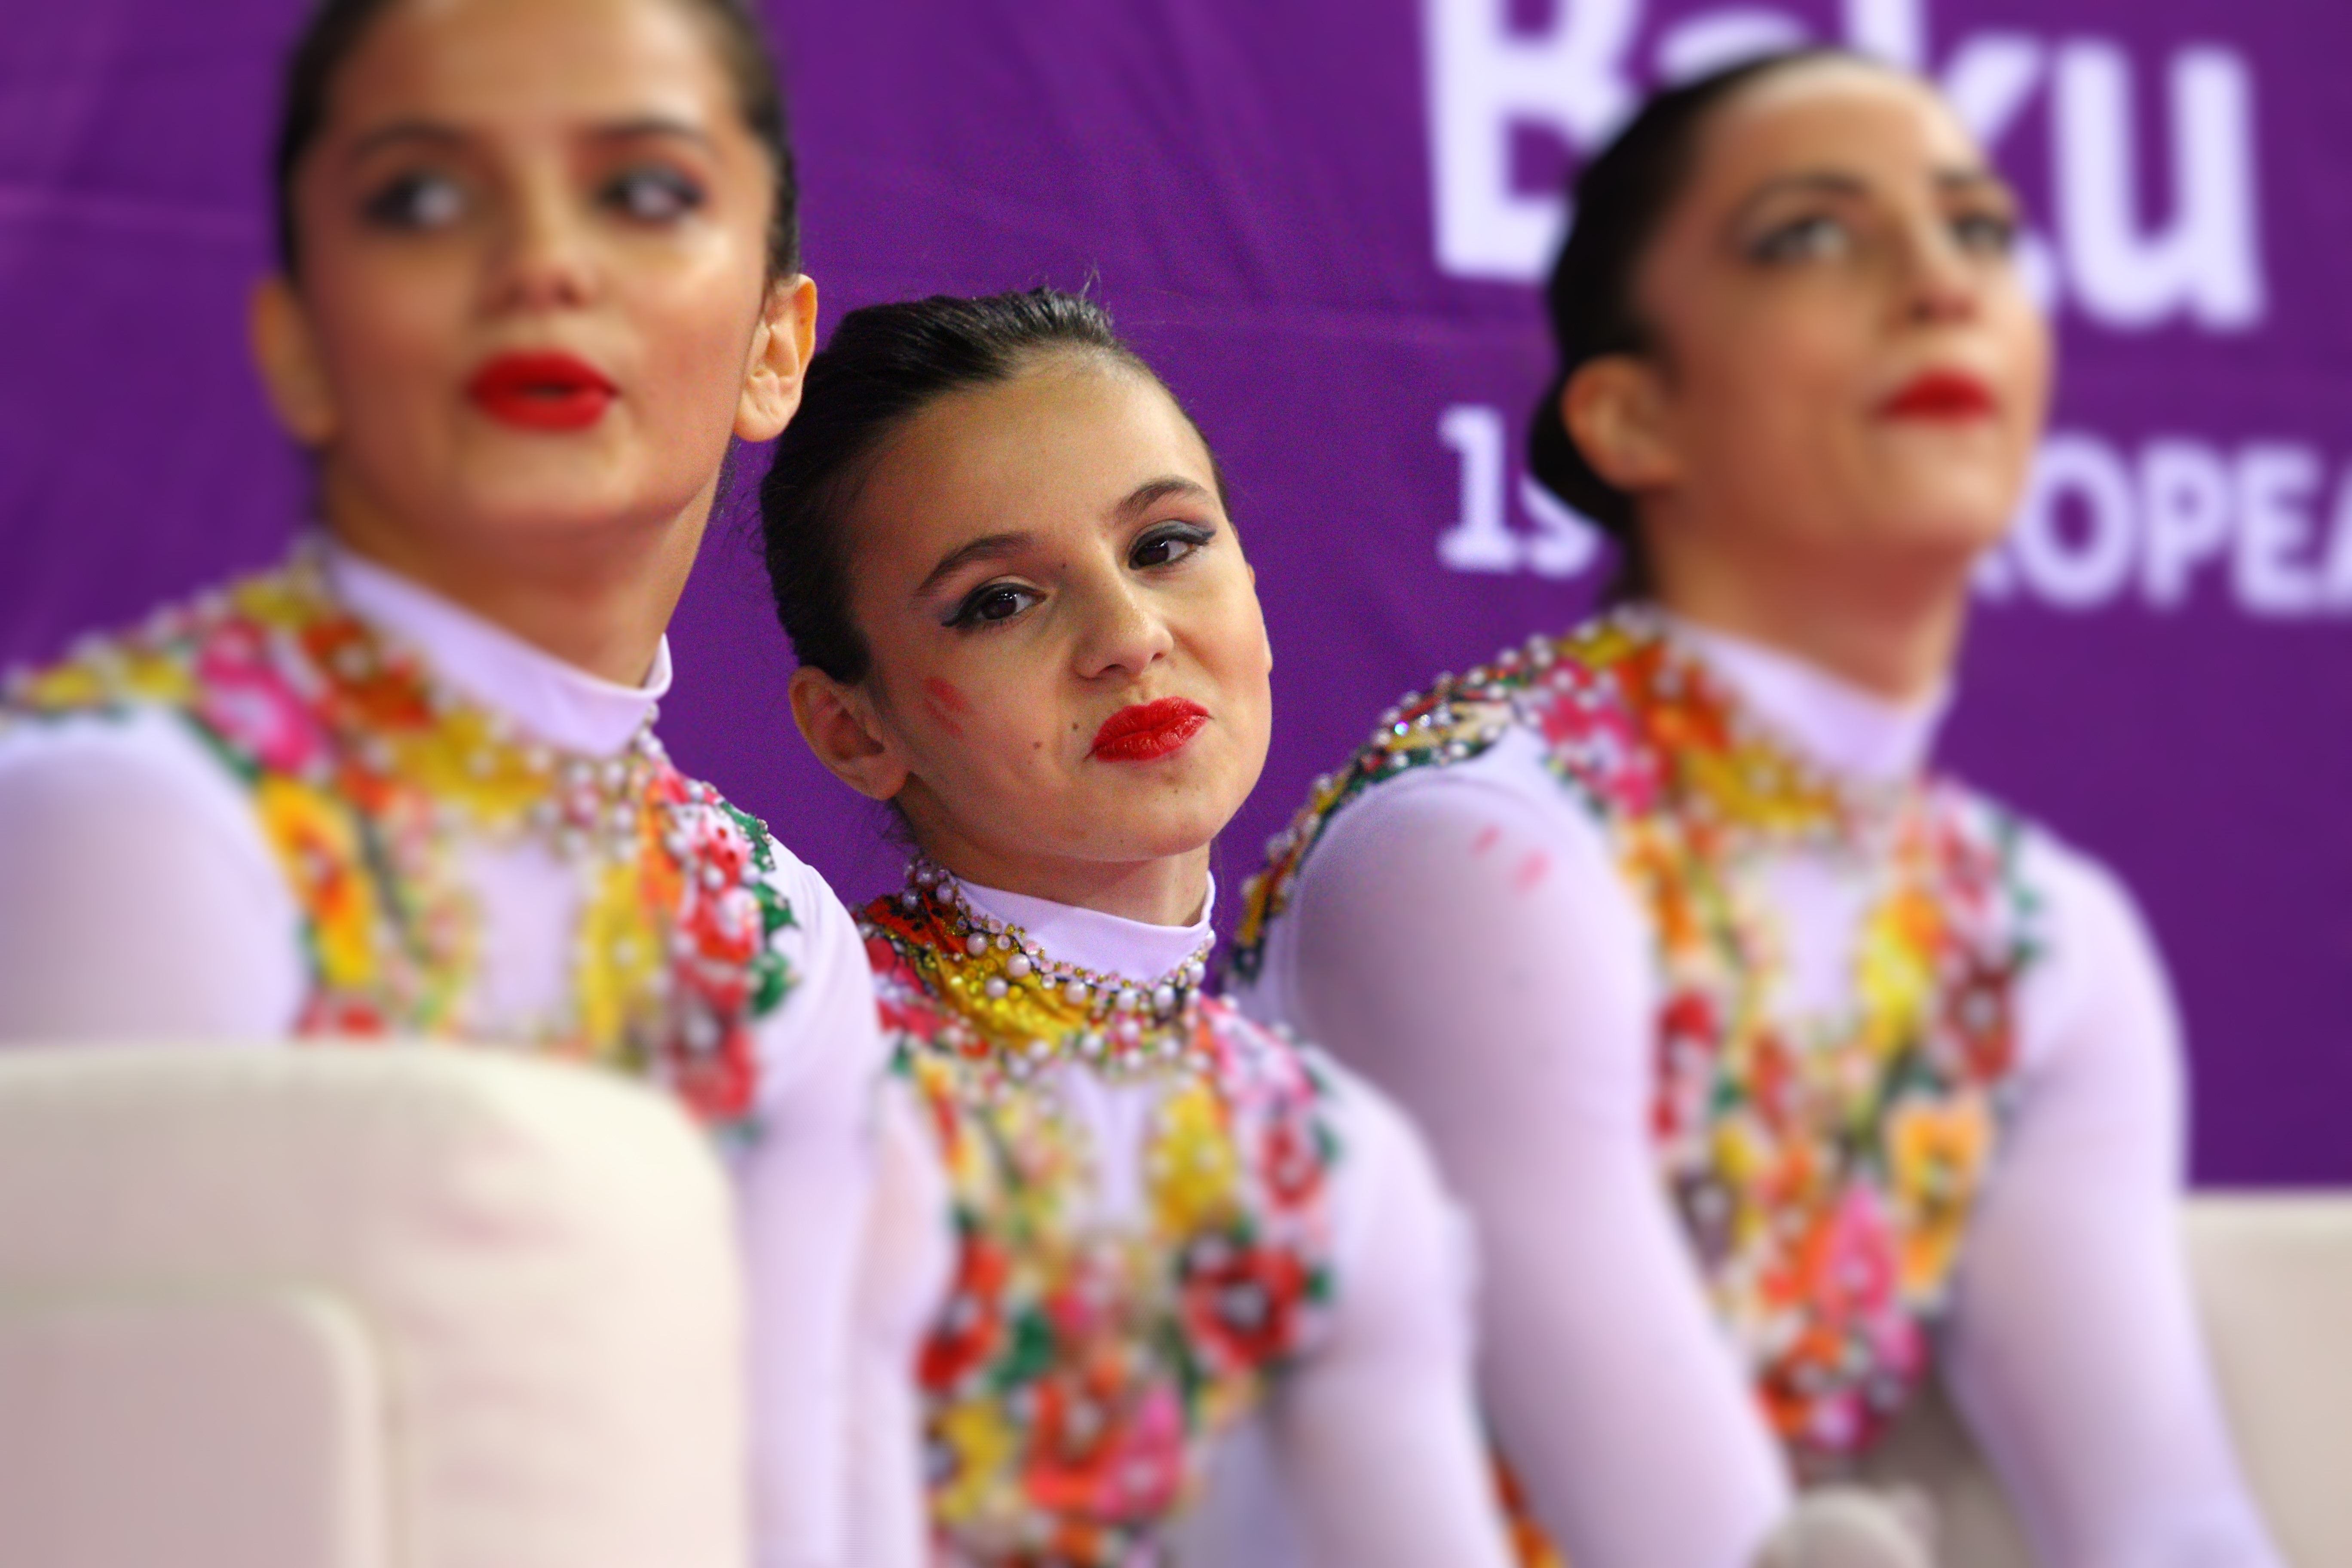 Azerbaijani gymnasts leave step away from medal